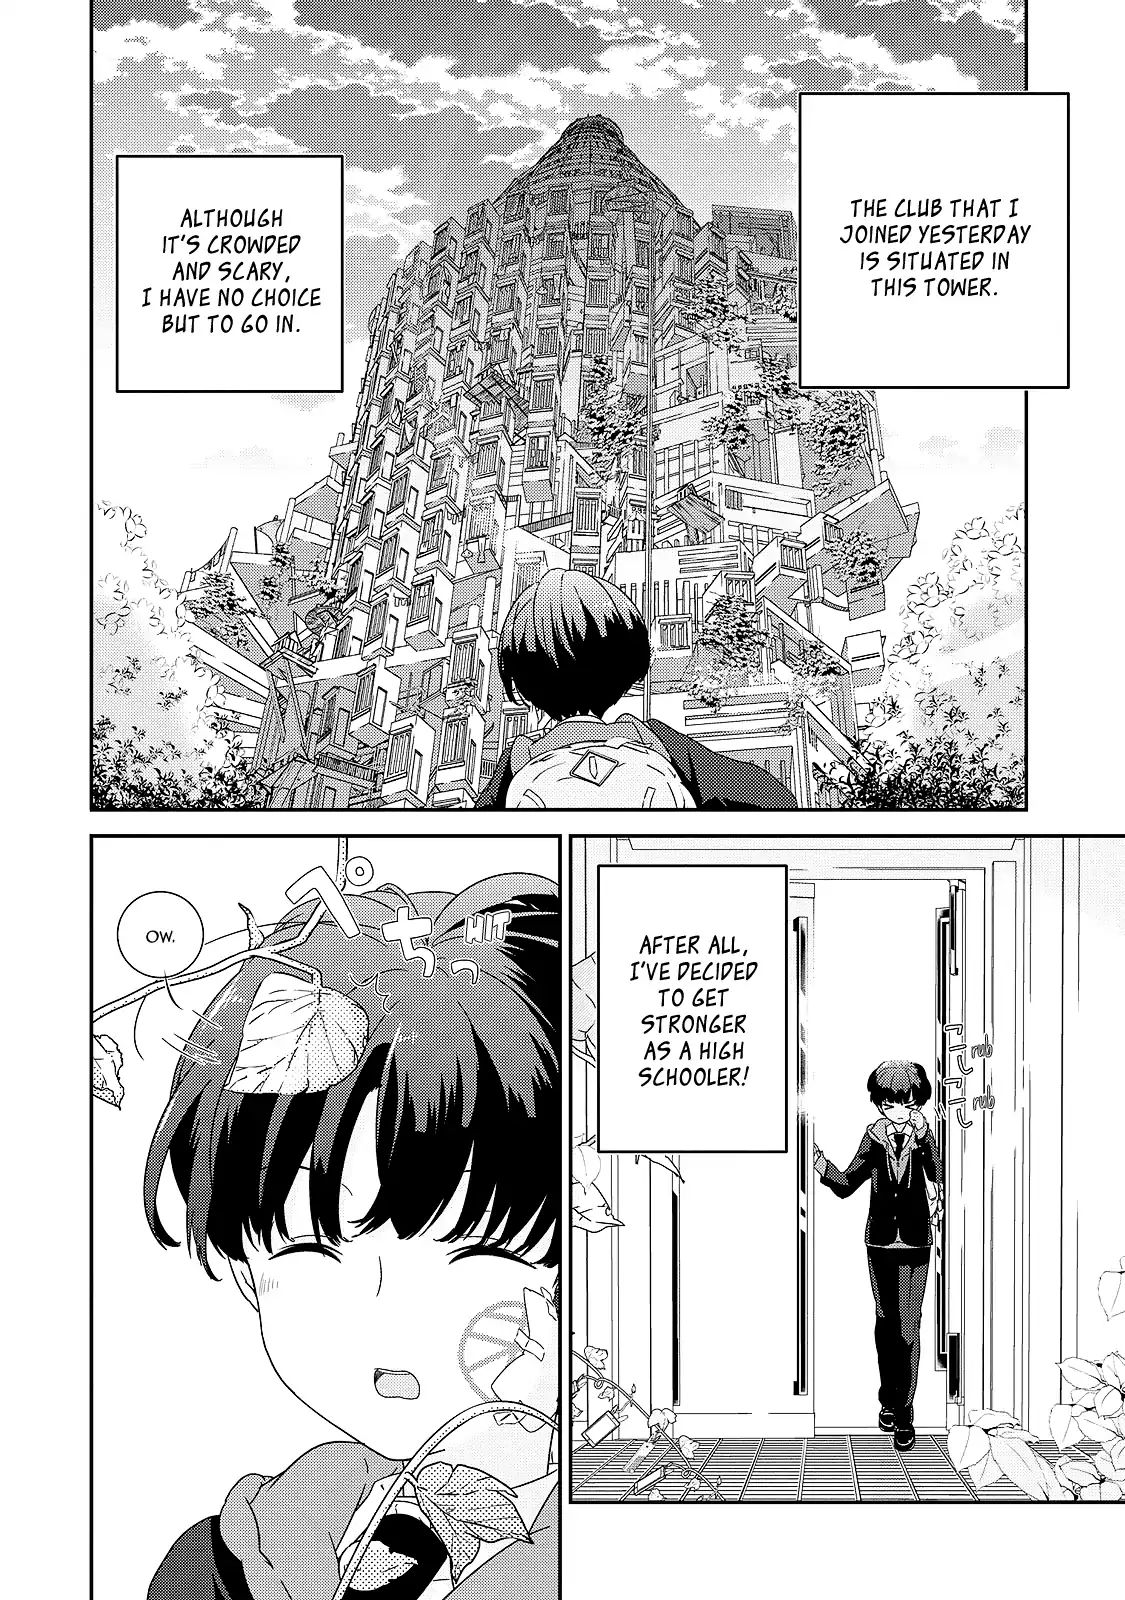 The Female God of Babel: KAMISAMA Club in Tower of Babel - chapter 2 - #6